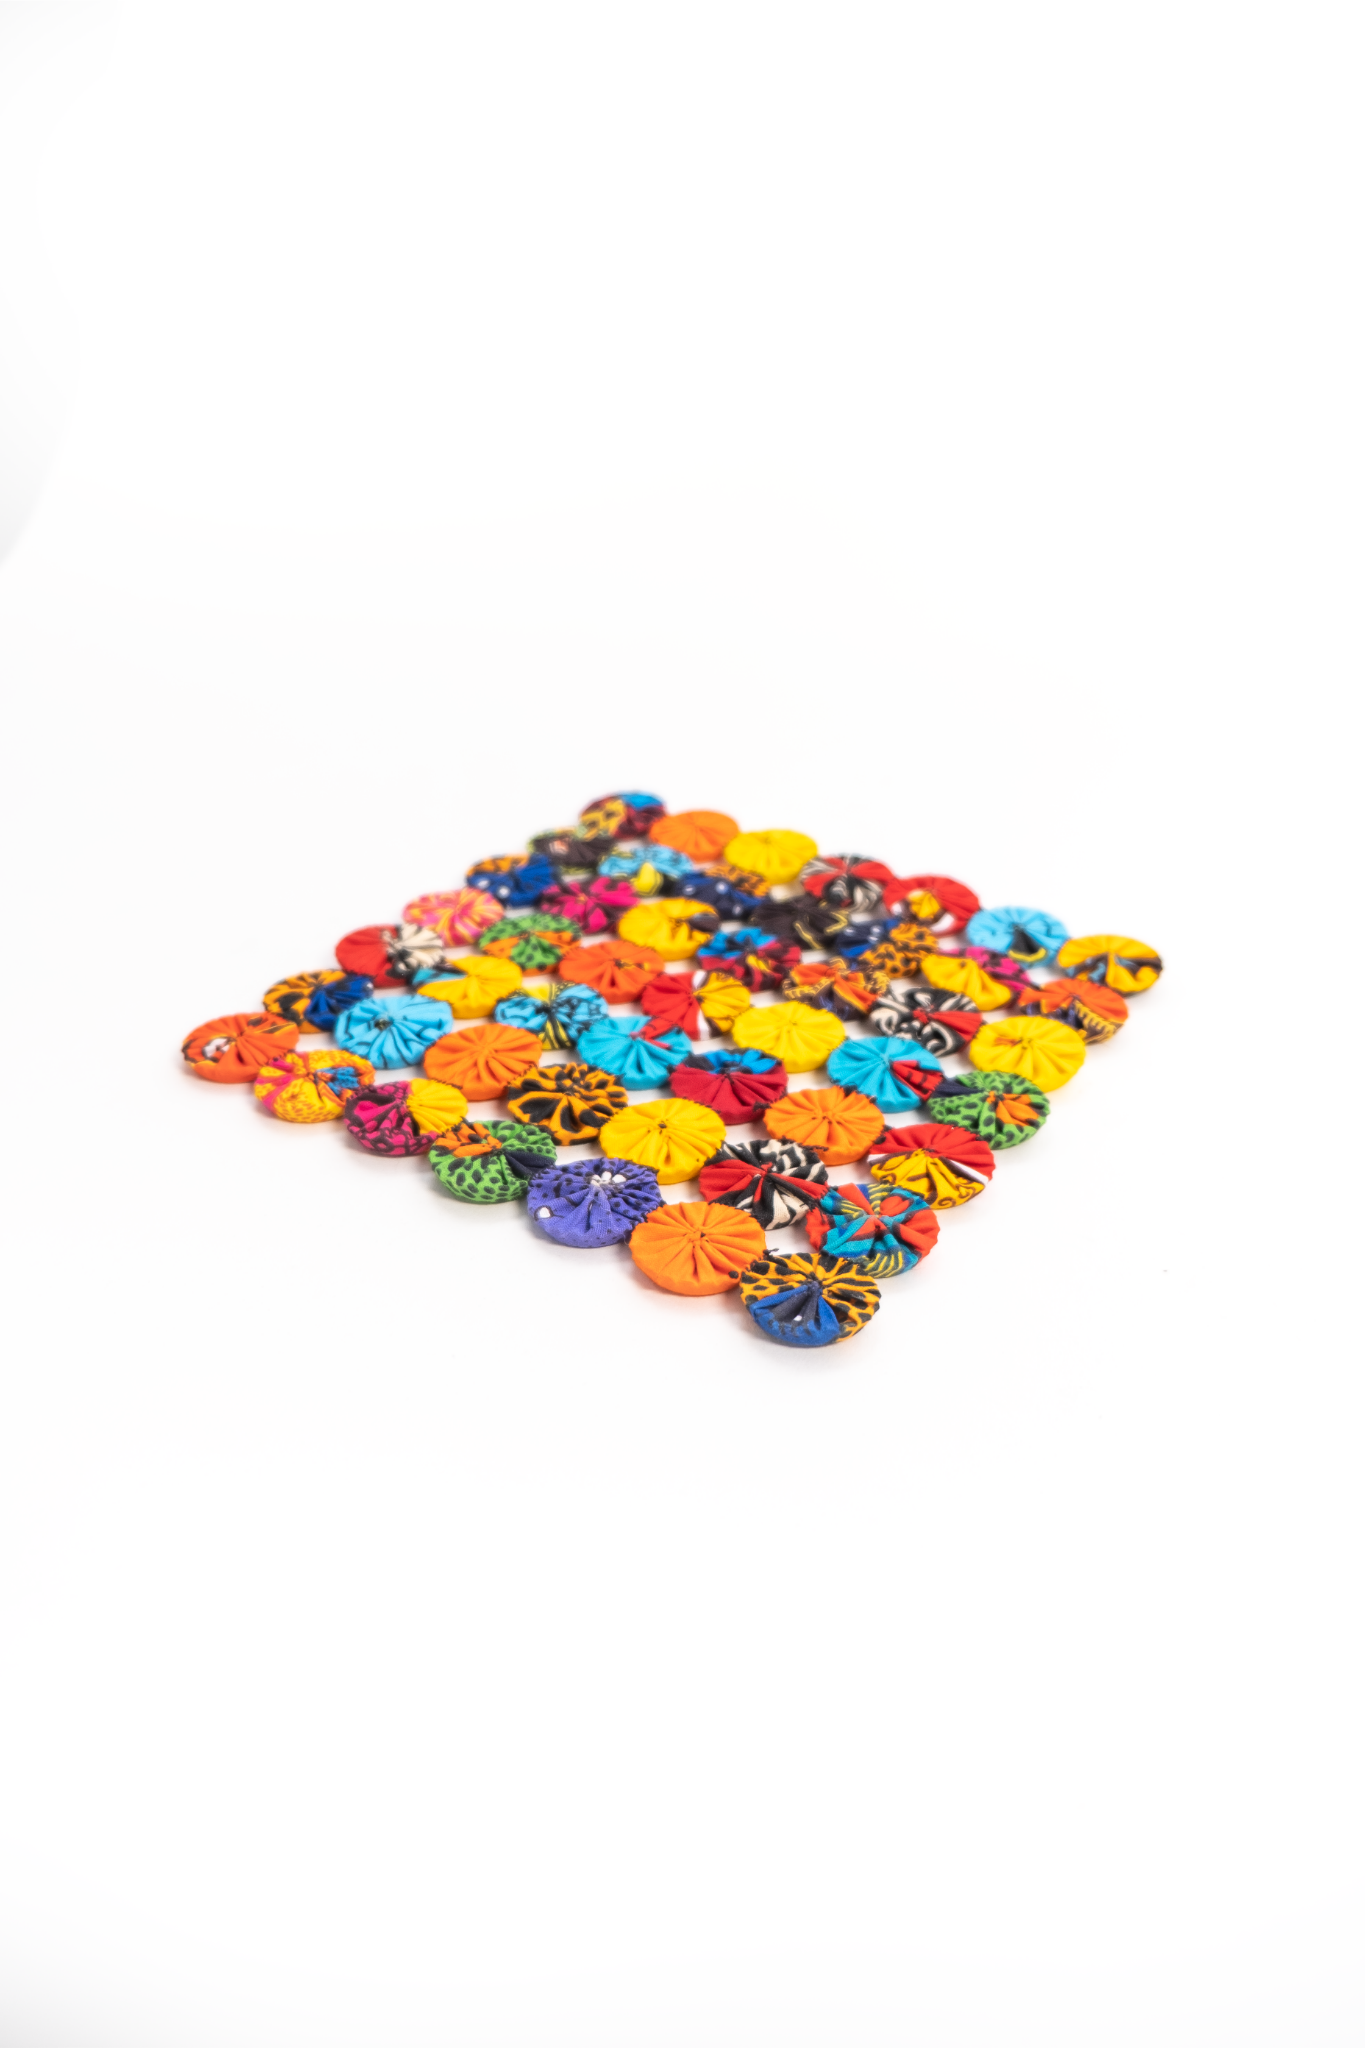 Recycled Bottle Cap Pot Holders